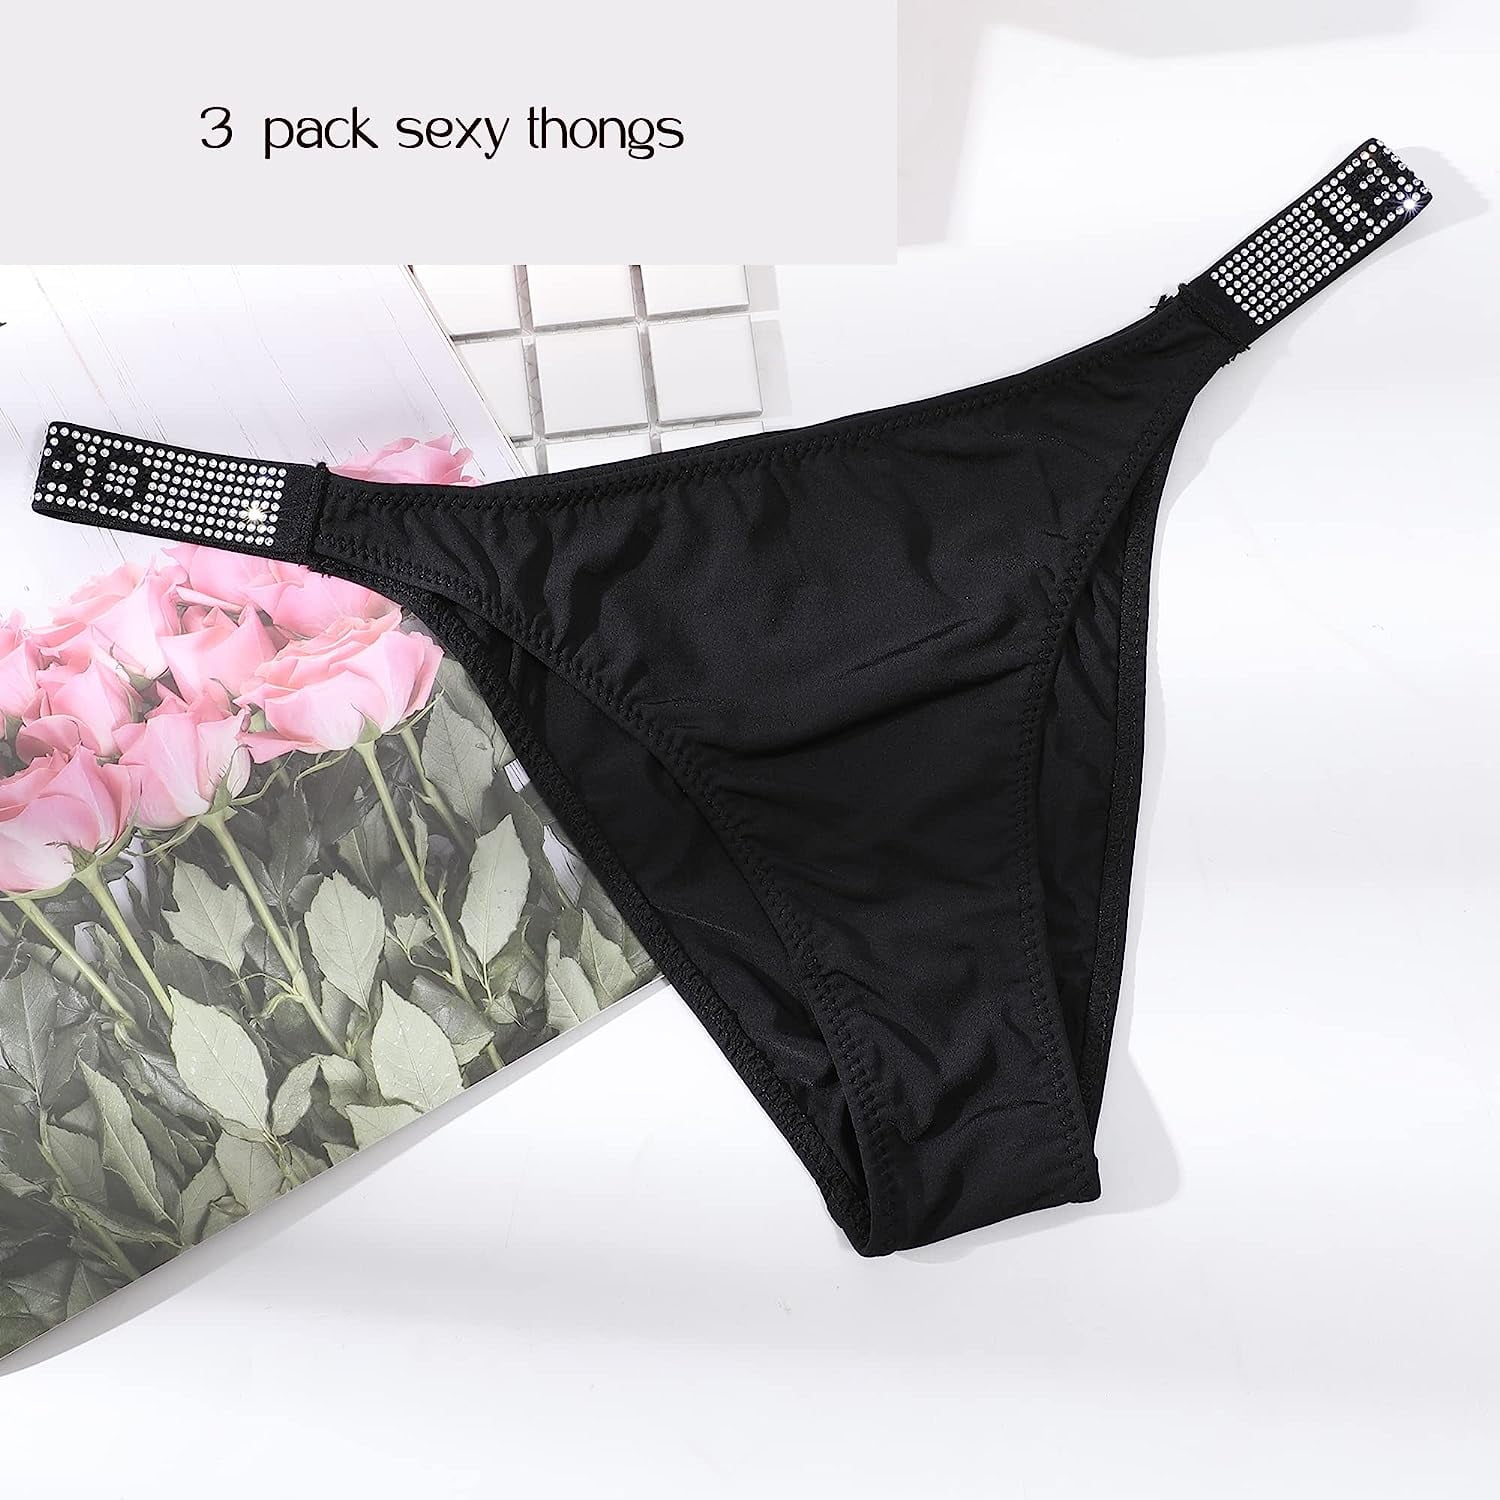 LEVAO Sexy Panties, Thongs for Women Letter Algeria